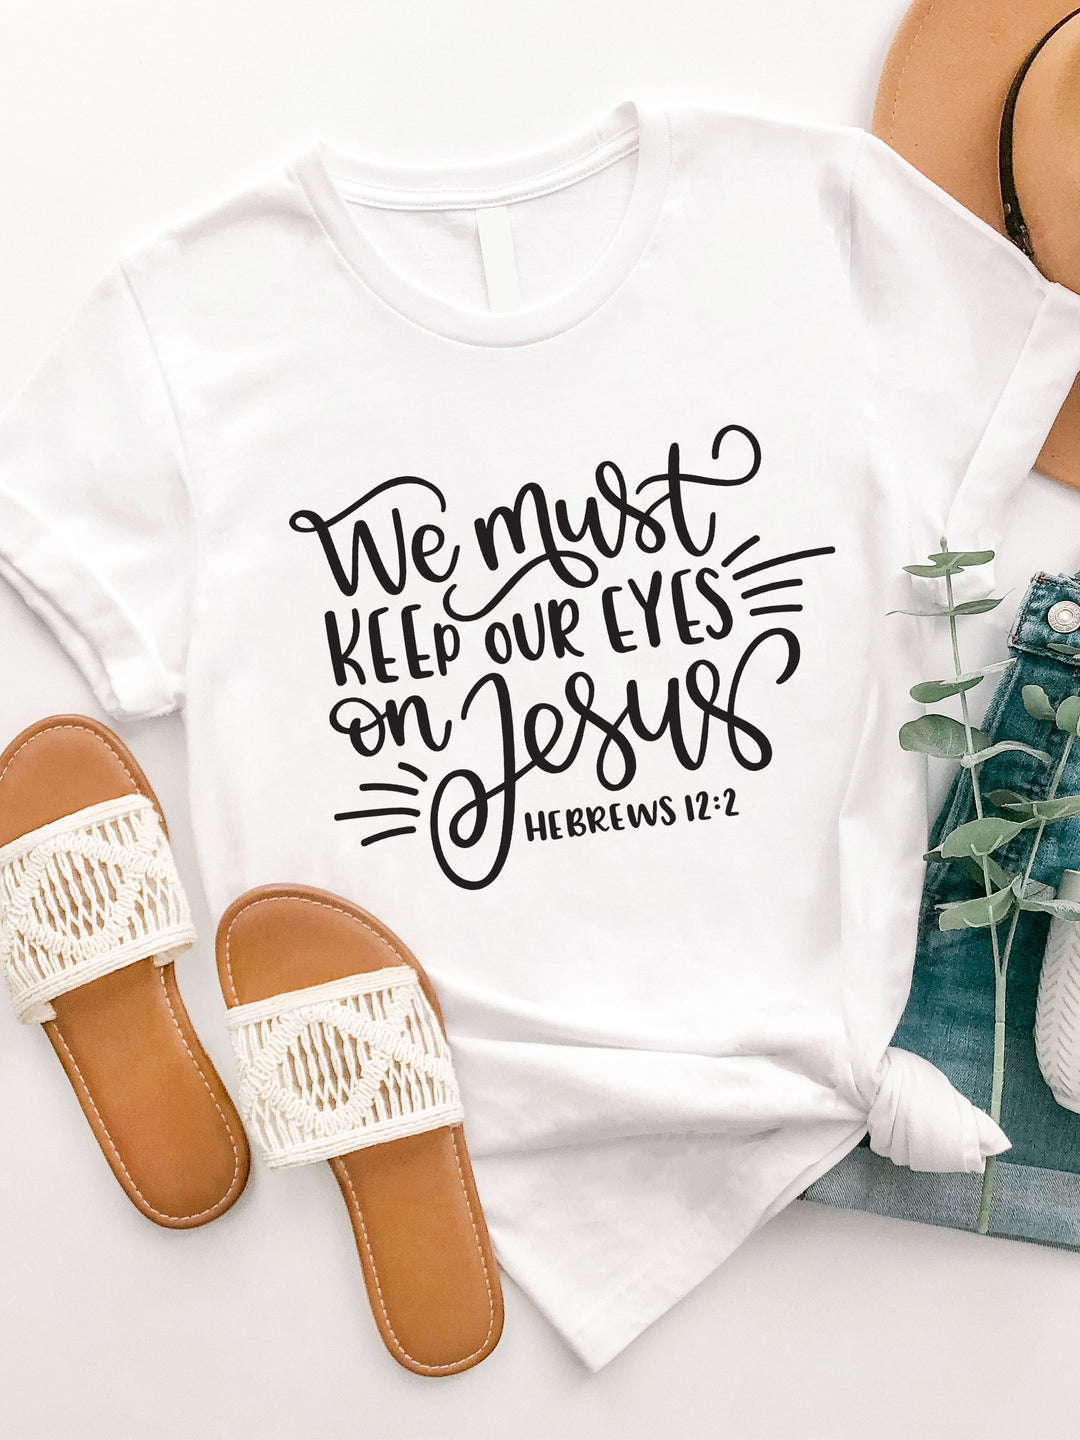 Keep our eyes on Jesus Graphic Tee